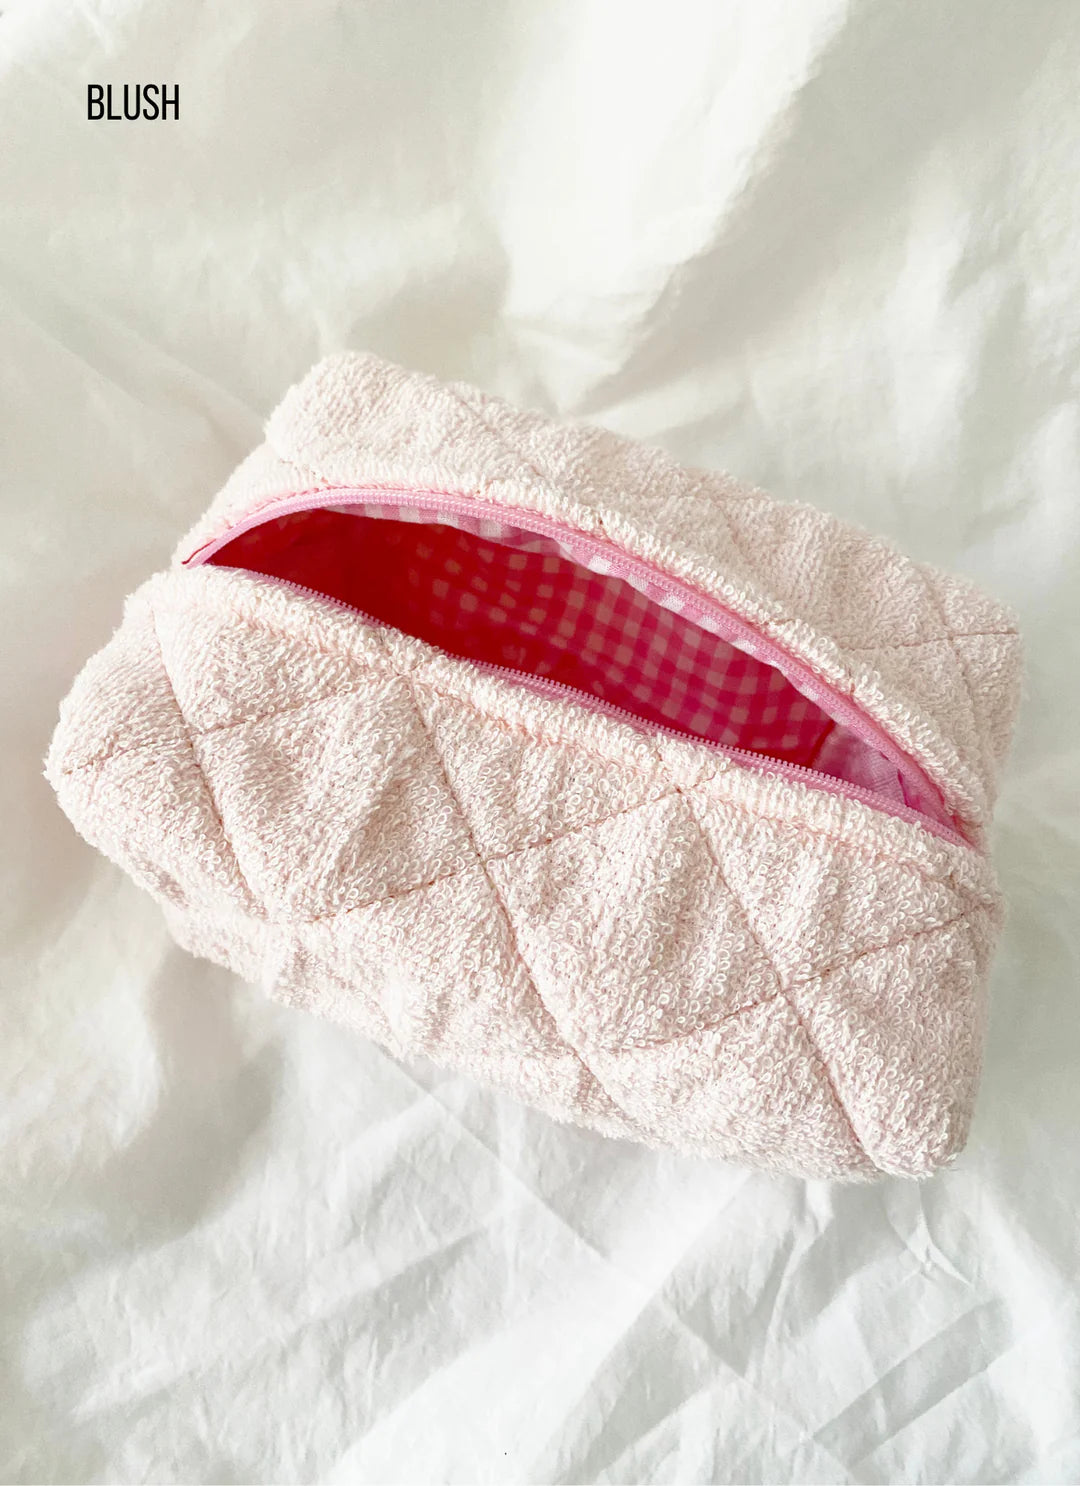 Purchase Wholesale terry cloth makeup bag. Free Returns & Net 60